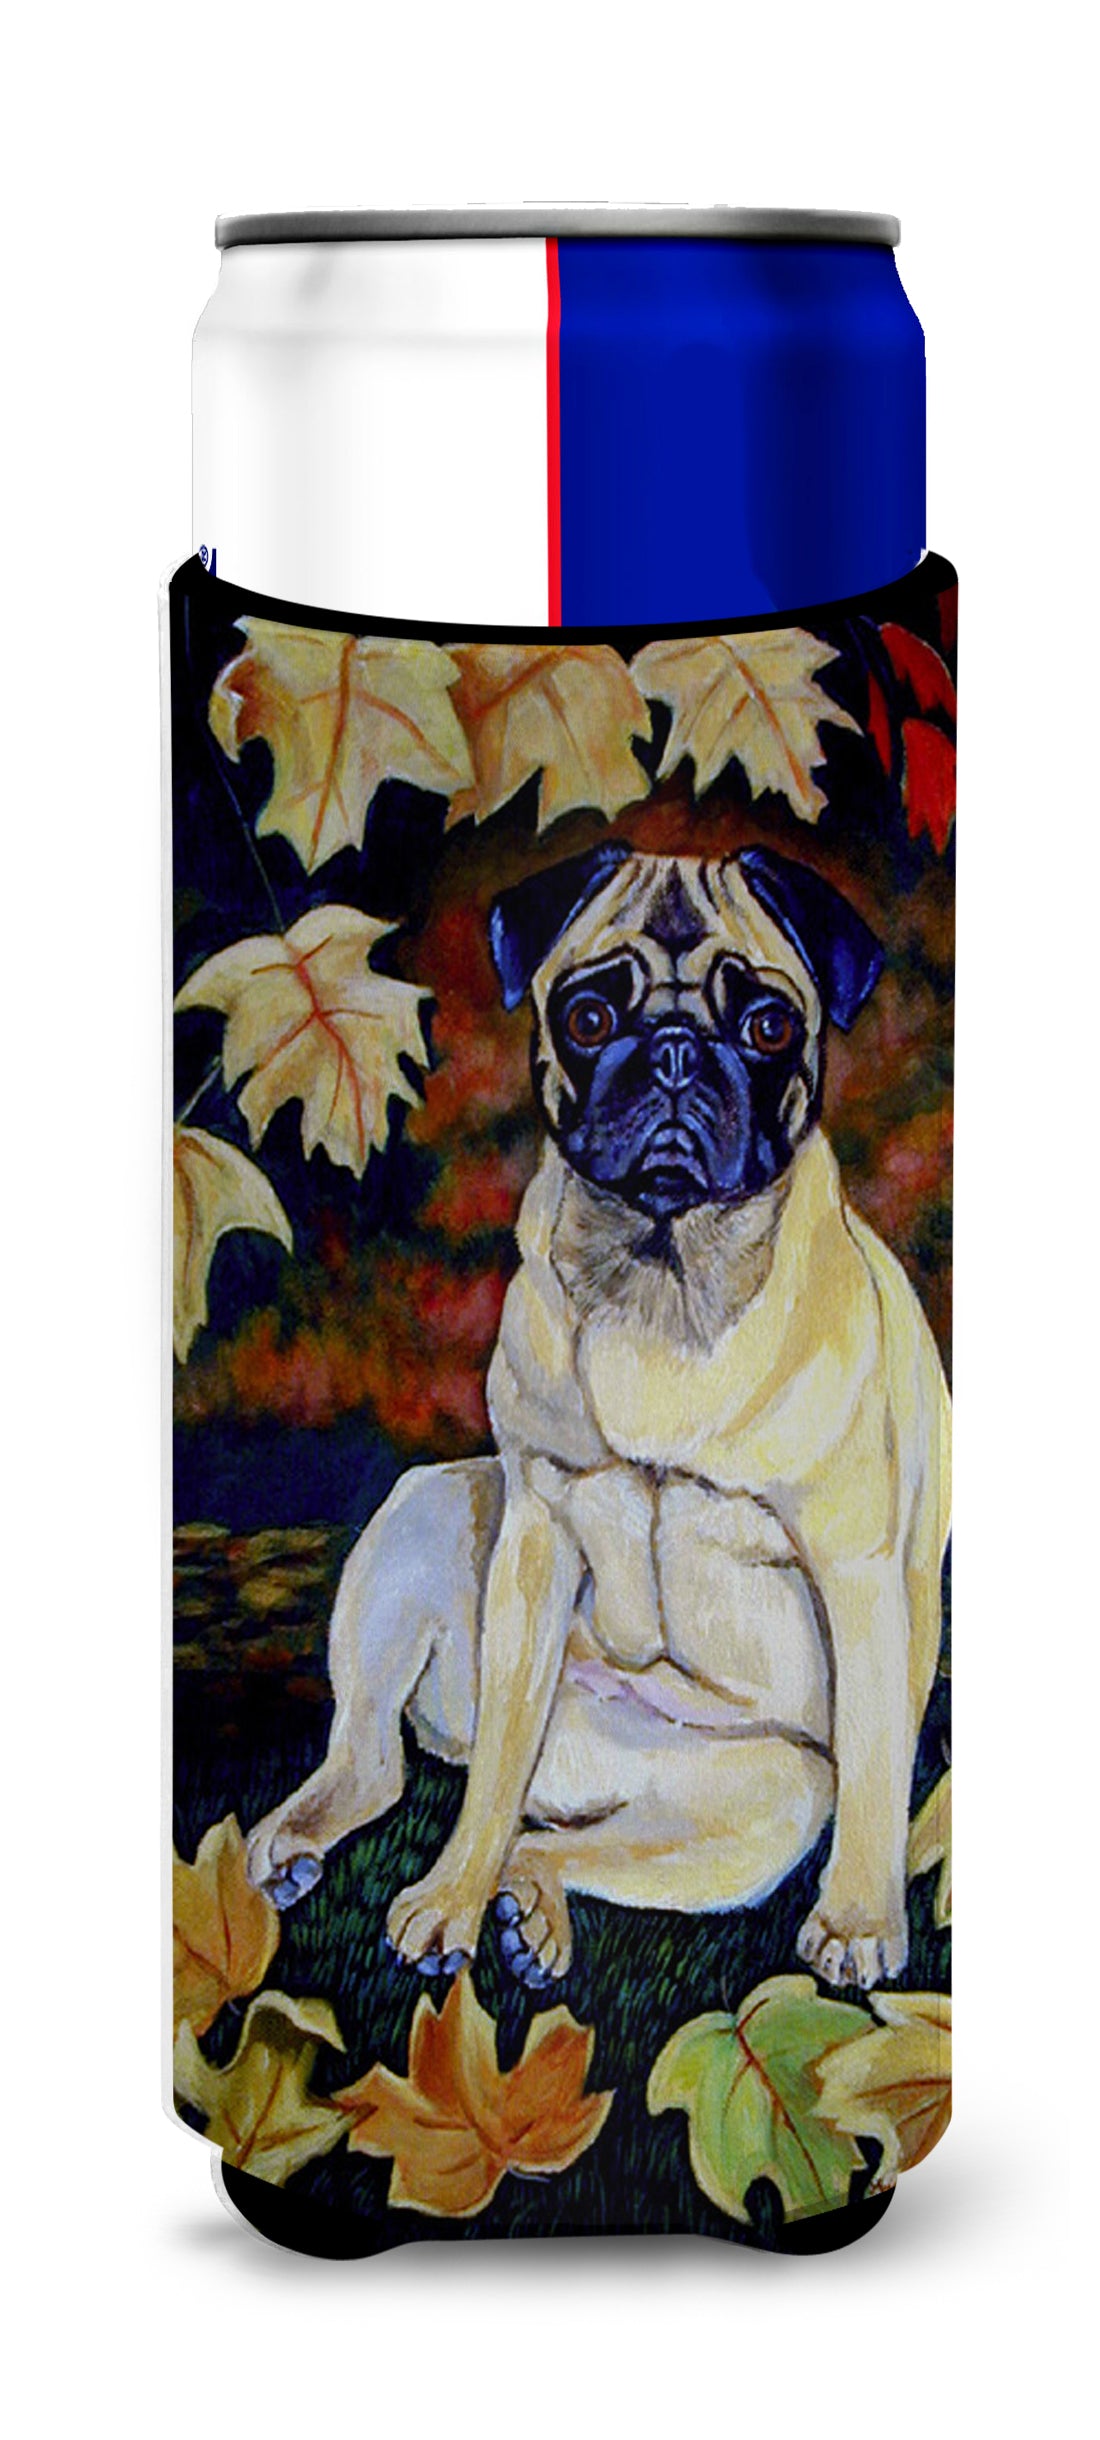 Fawn Pug in Fall Leaves Ultra Beverage Insulators for slim cans 7160MUK.